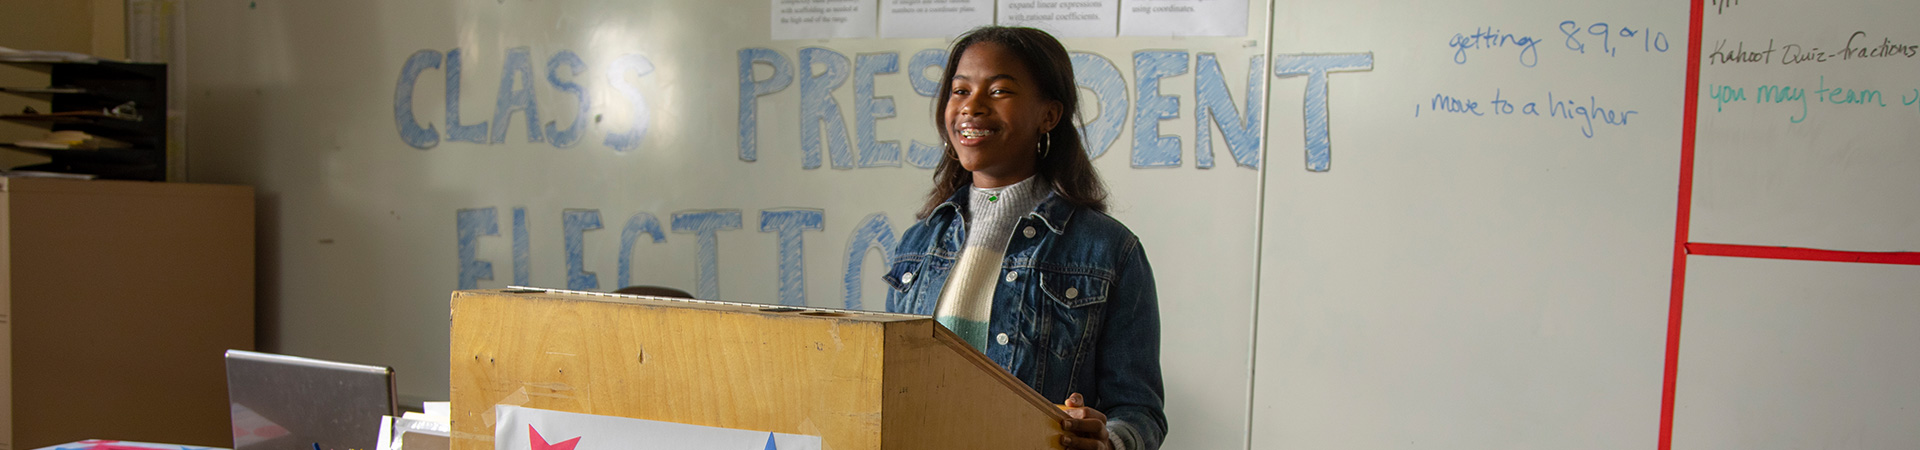  A teen Girl Scout speaking at a lectern in front of a whiteboard that reads "Class President Election"  